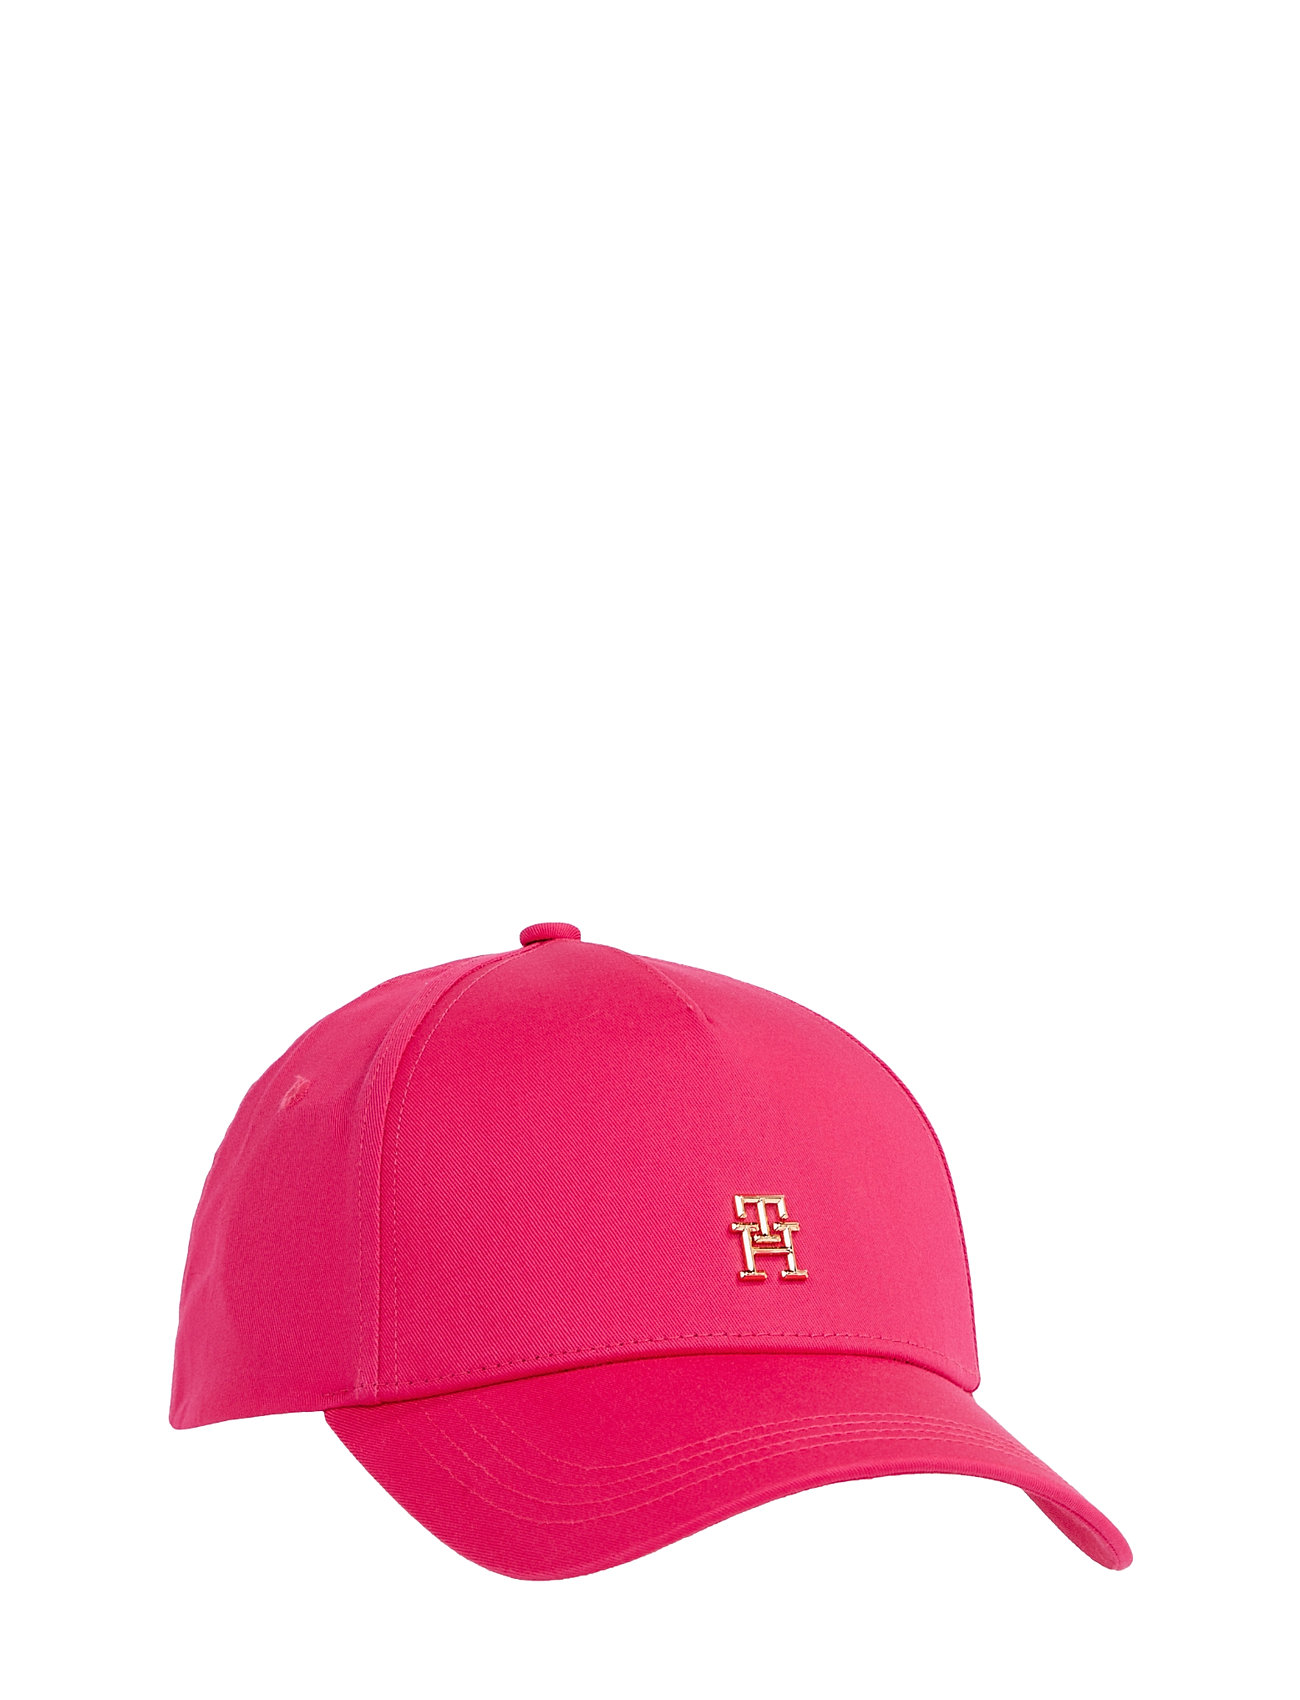 Th Contemporary Cap Accessories Headwear Caps Pink Tommy Hilfiger